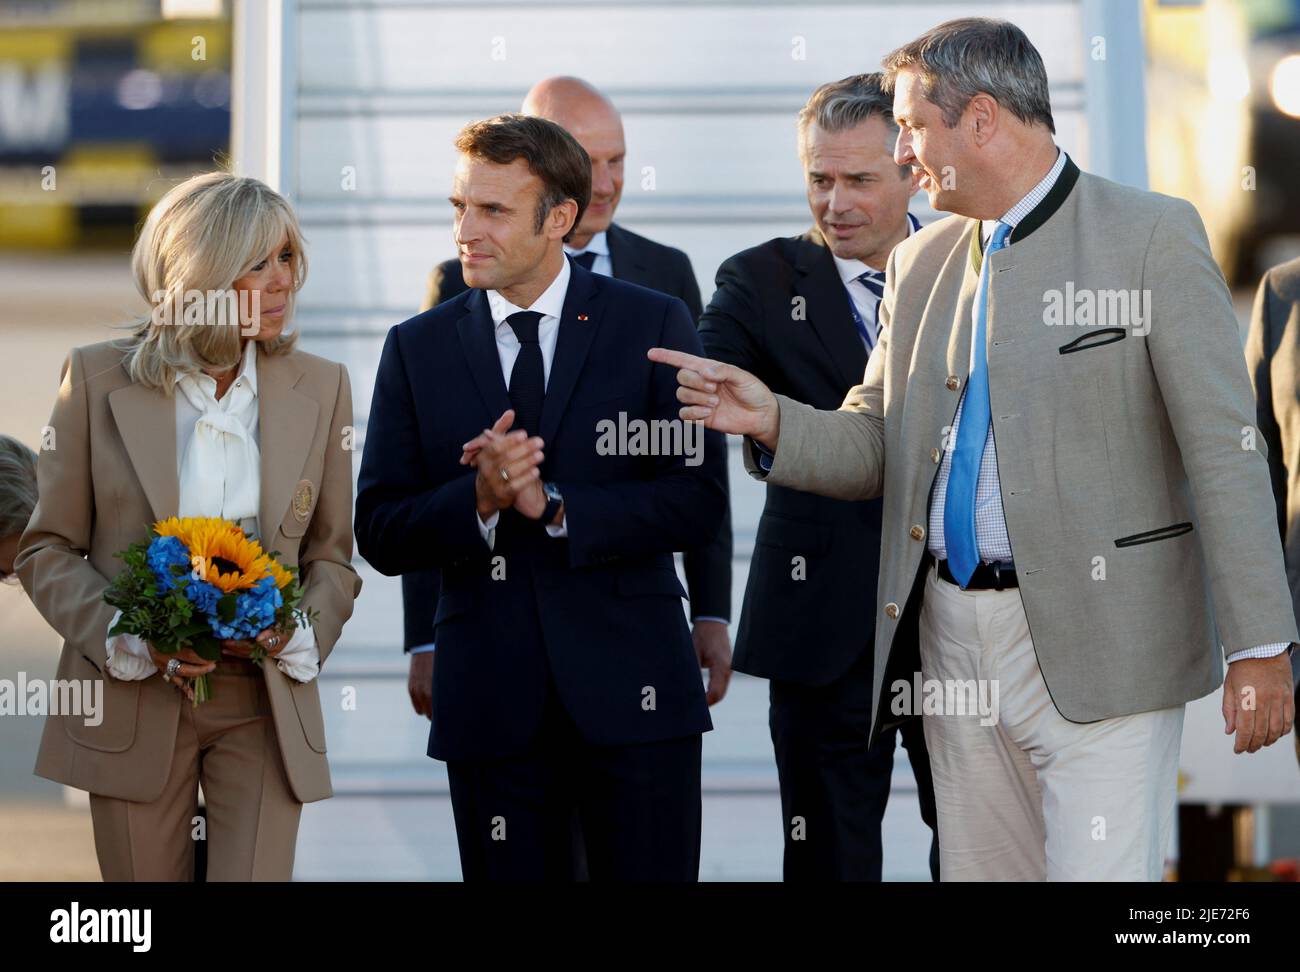 French President Emmanuel Macron's wife Brigitte Macron holds flowers given by children in traditional Bavarian clothes as she speaks with Bavaria's State Premier Markus Soeder upon arrival at Franz-Josef-Strauss airport in Munich ahead of the G7 summit, which will take place in the Bavarian alpine resort of Elmau Castle, Germany, June 25, 2022. REUTERS/Michaela Rehle Stock Photo